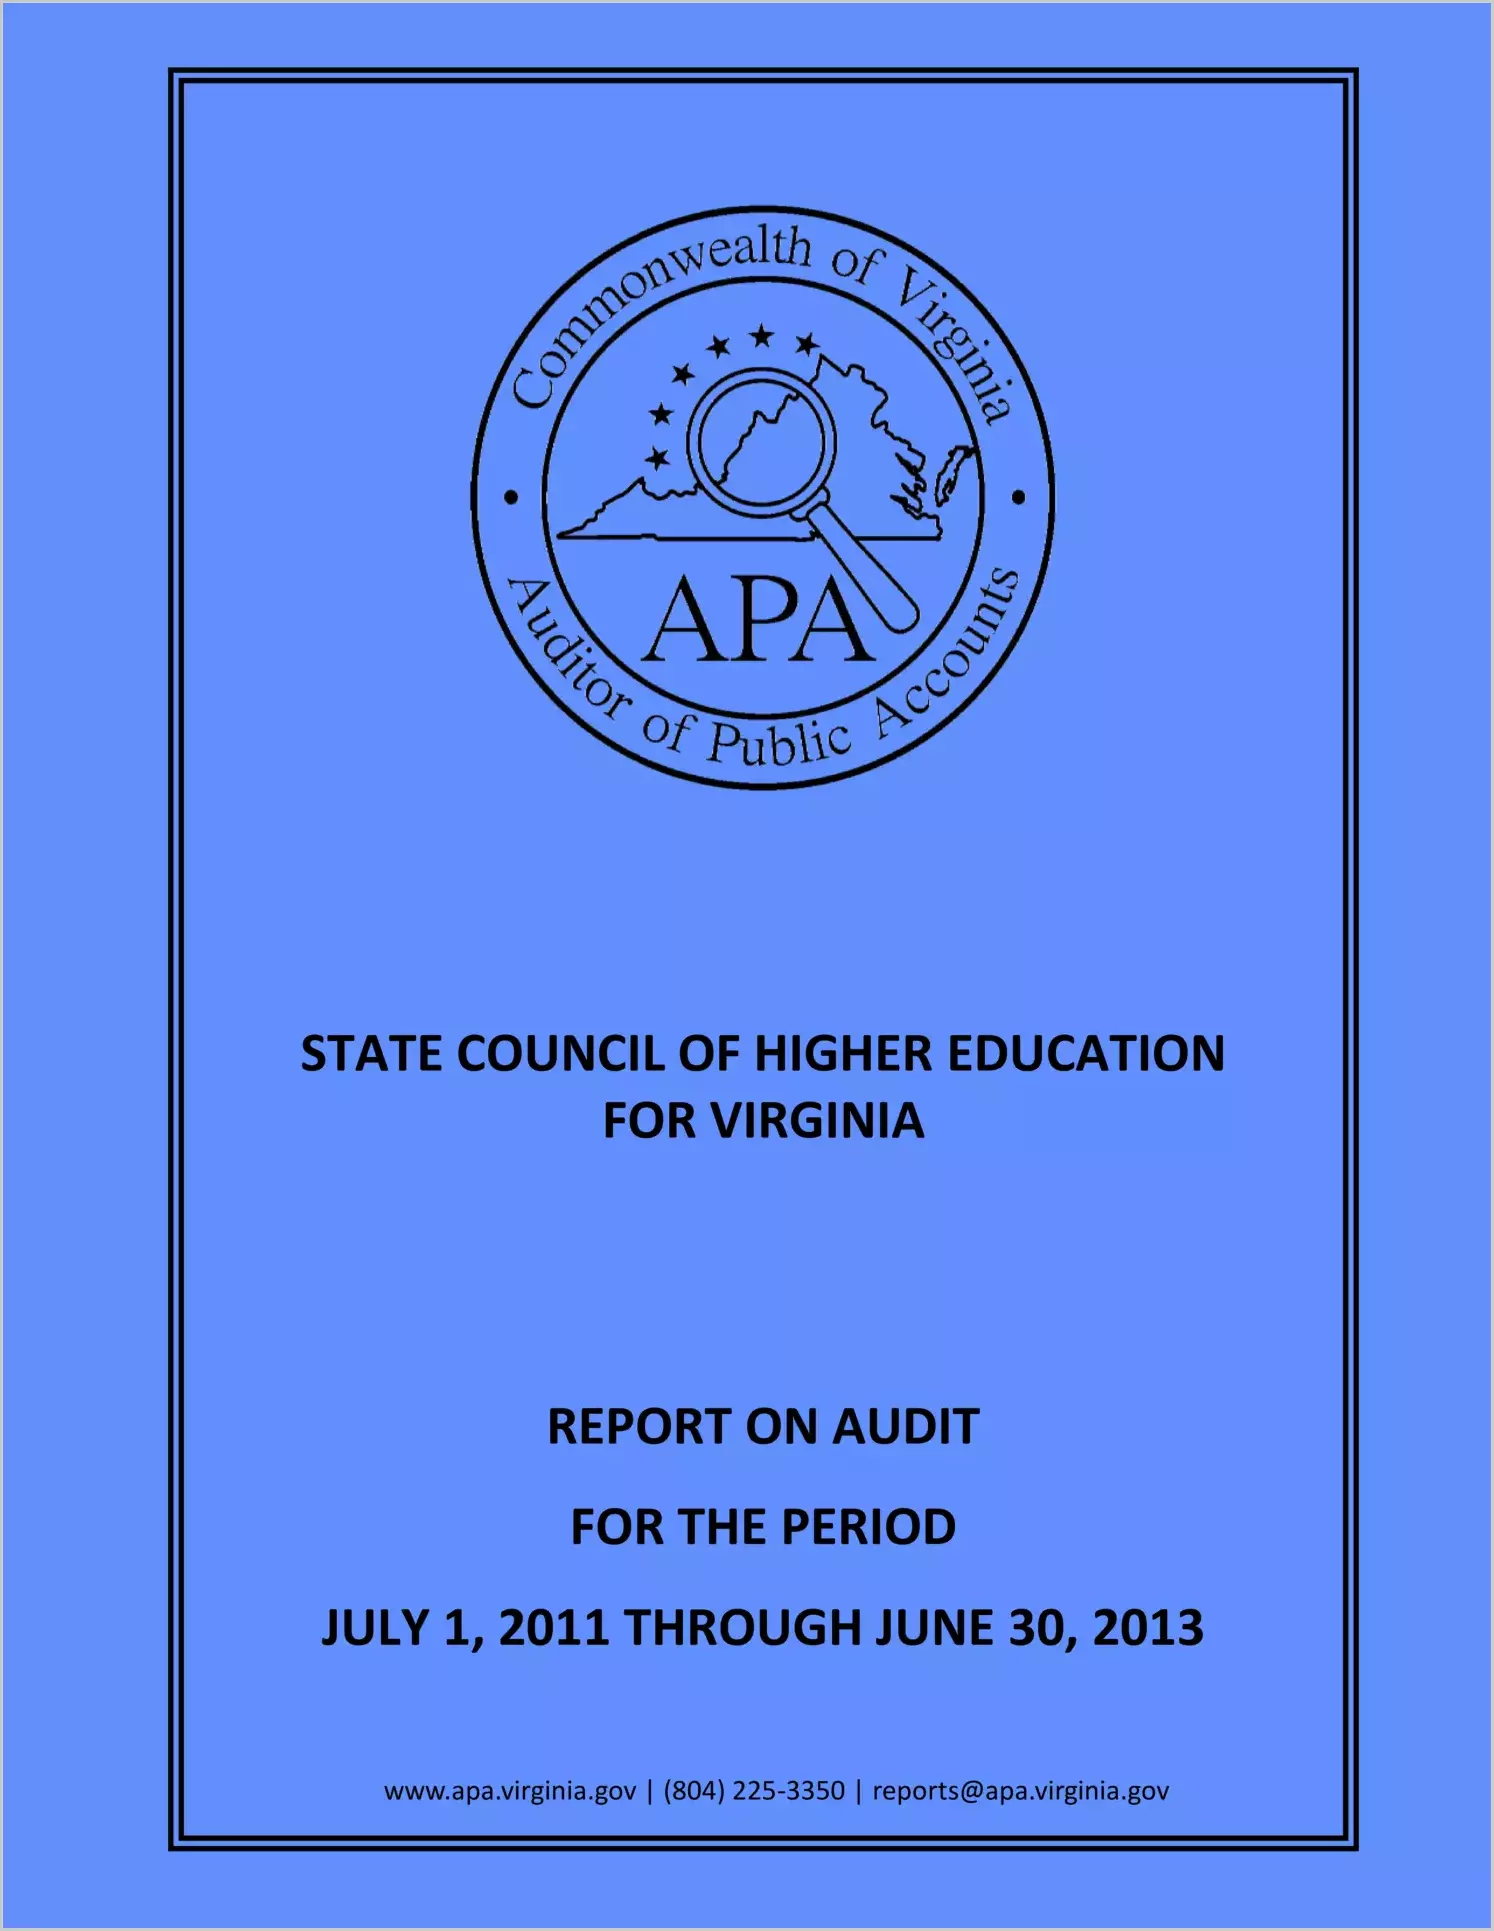 State Council of Higher Education for Virginia for the period July 1, 2011 through June 30, 2013